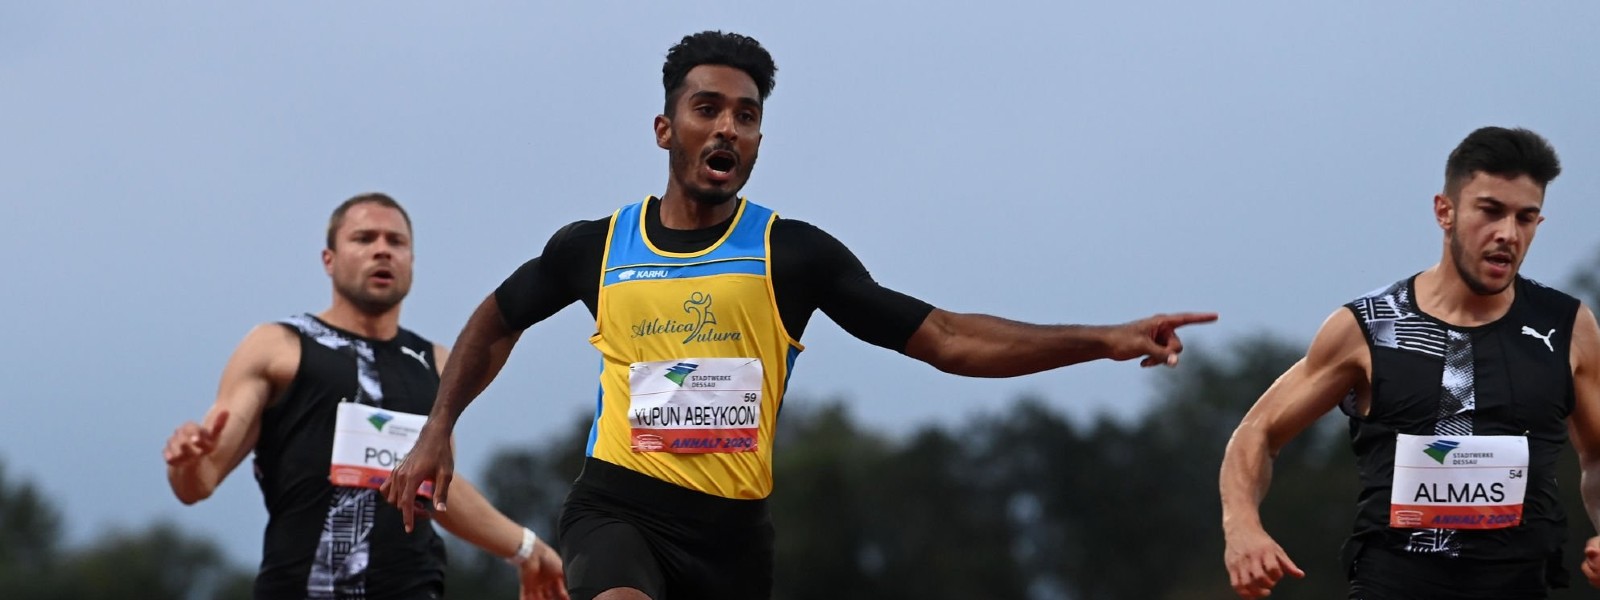 Yupun becomes first South Asian to finish 100m below 10 seconds & win